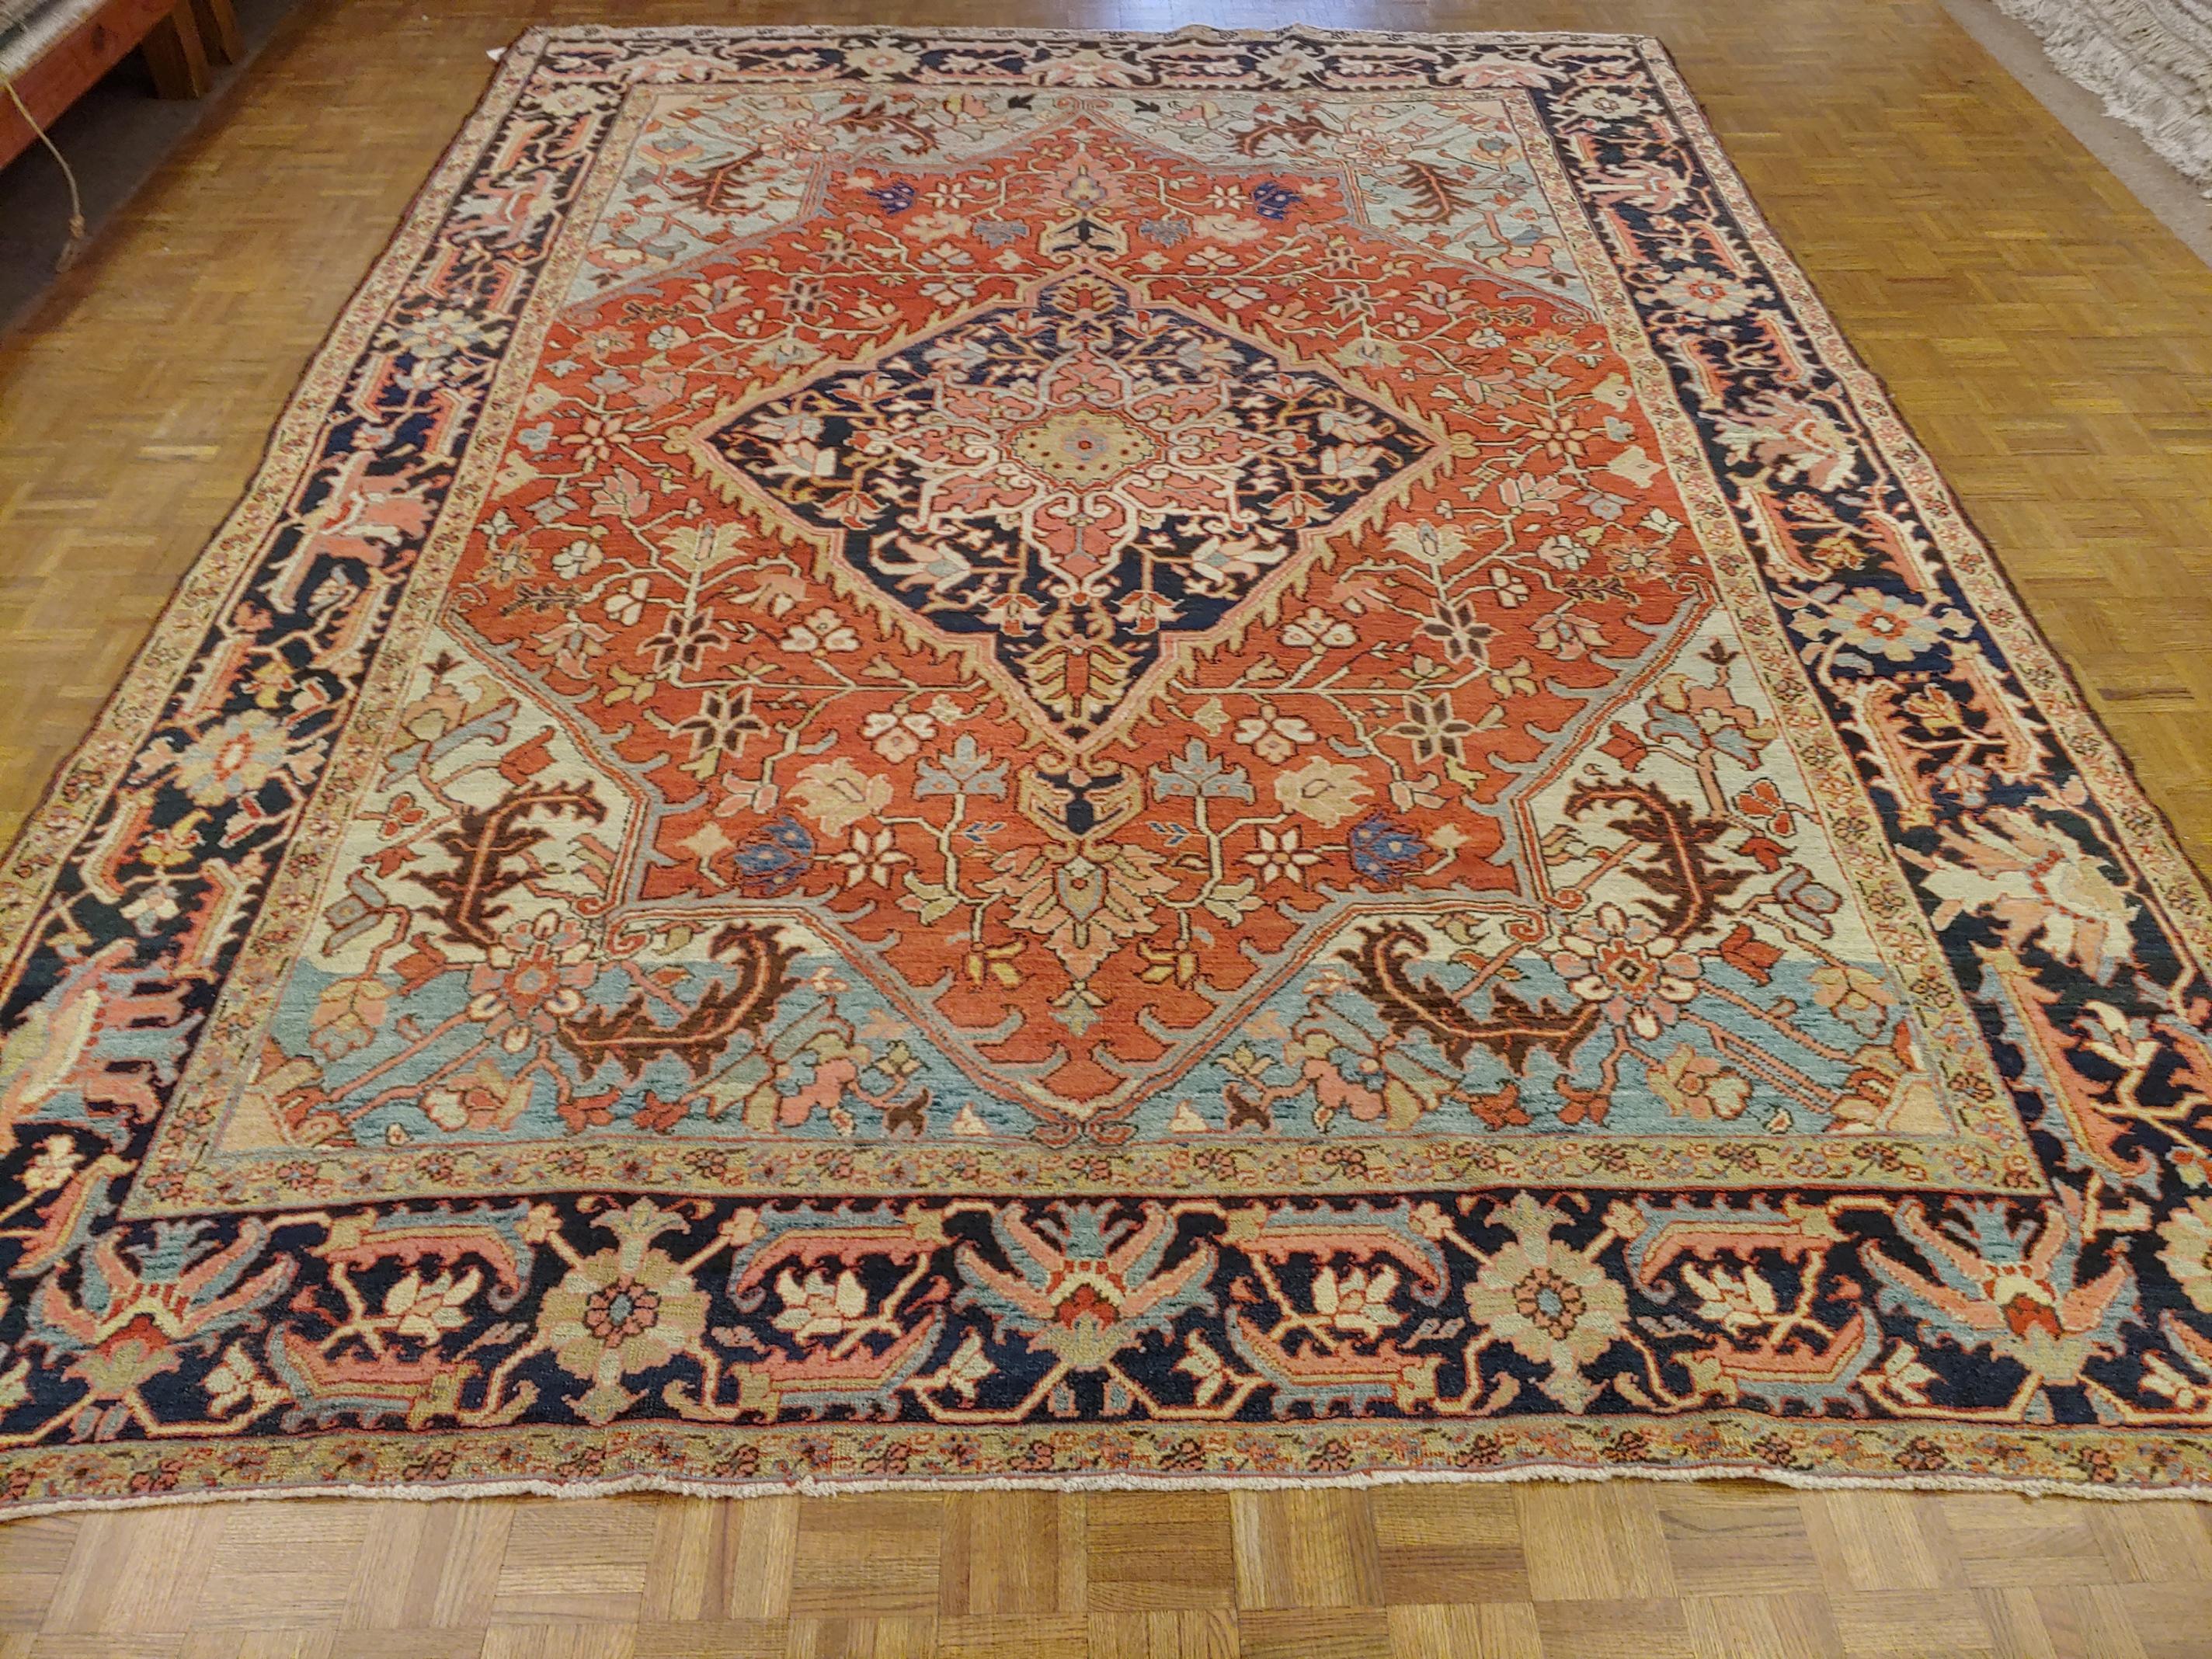 A magnificent antique Persian Heriz rug similar to a Serapi but not quite as old. It is a room size, about 9x12. This rug has a rust field with light blue corners and a navy border. The rug also uses a beautiful aubergine color as well. It also has